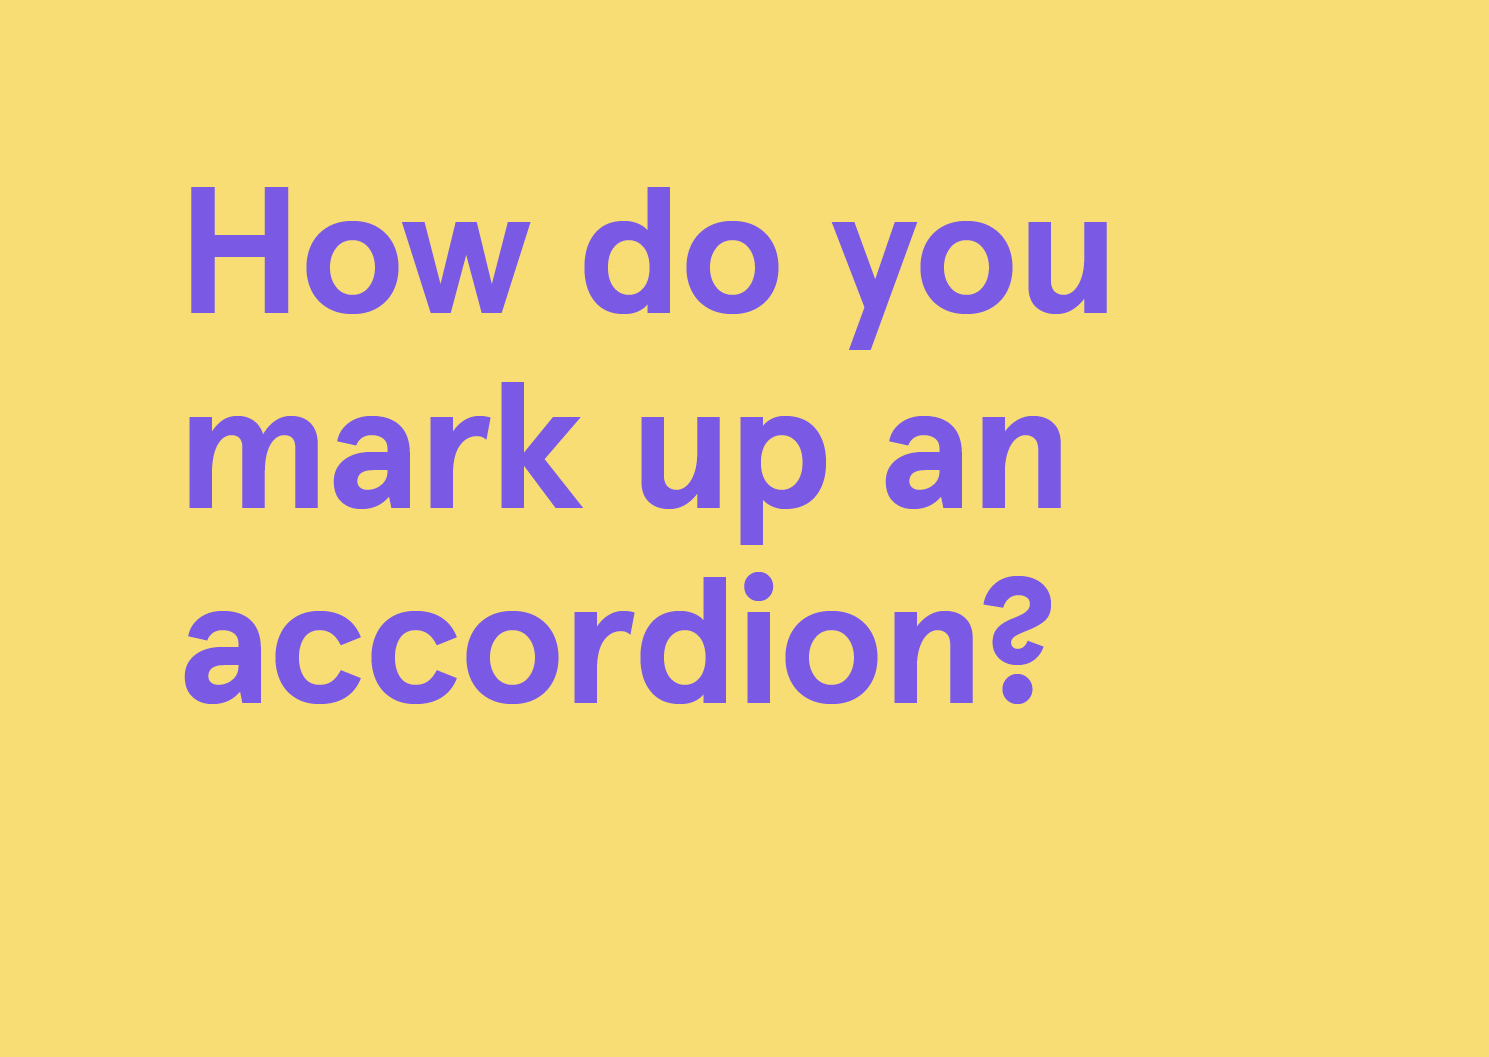 How do you mark up an accordion?